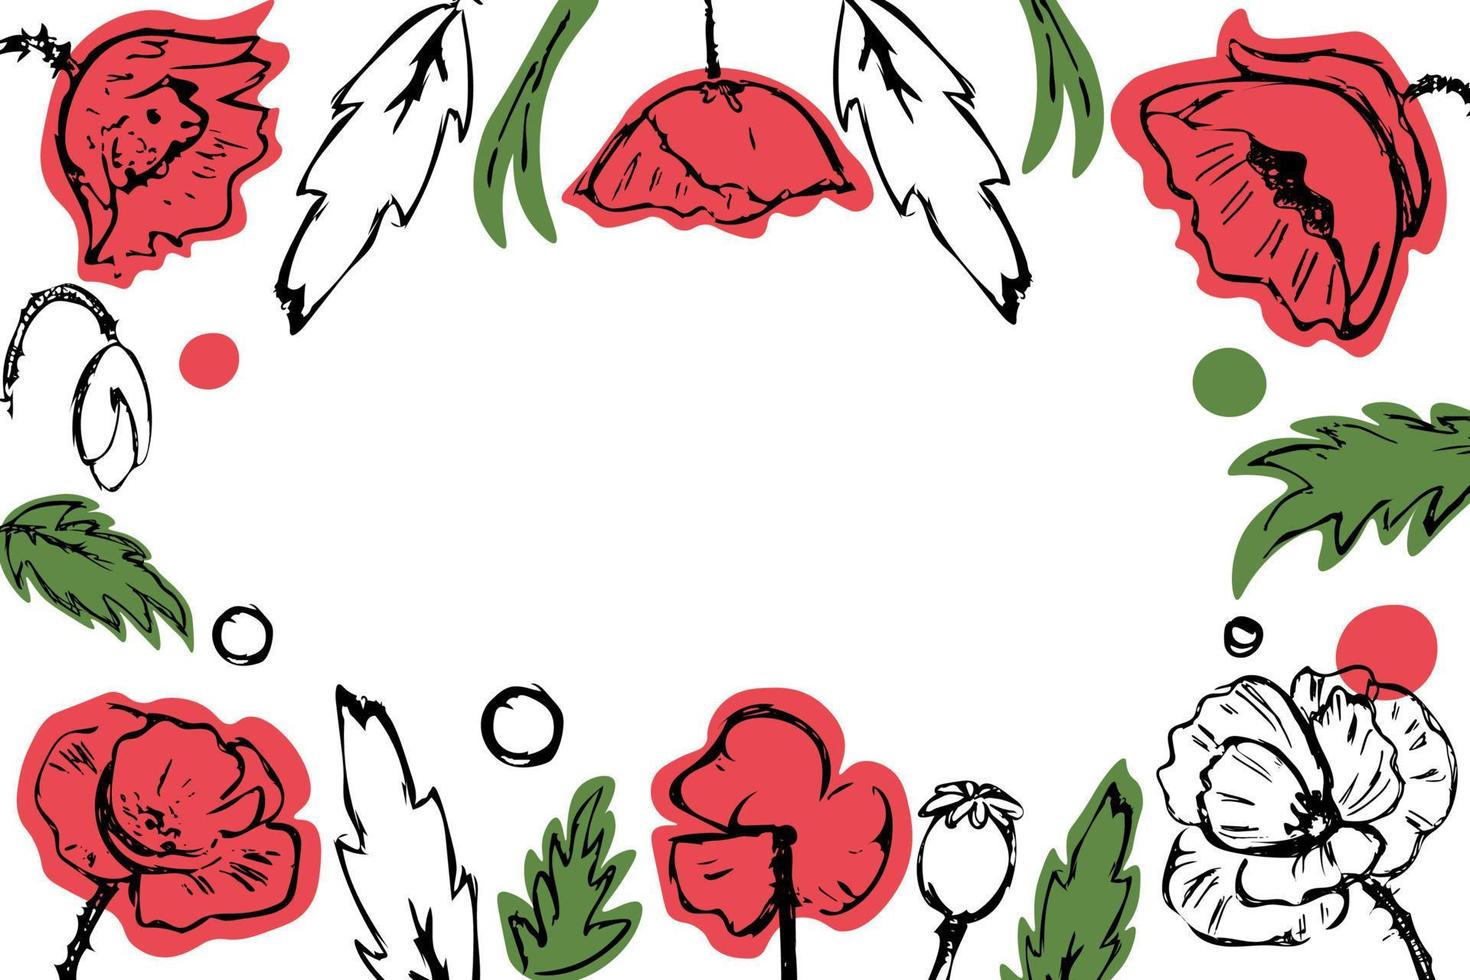 Poppies banner on white background vector